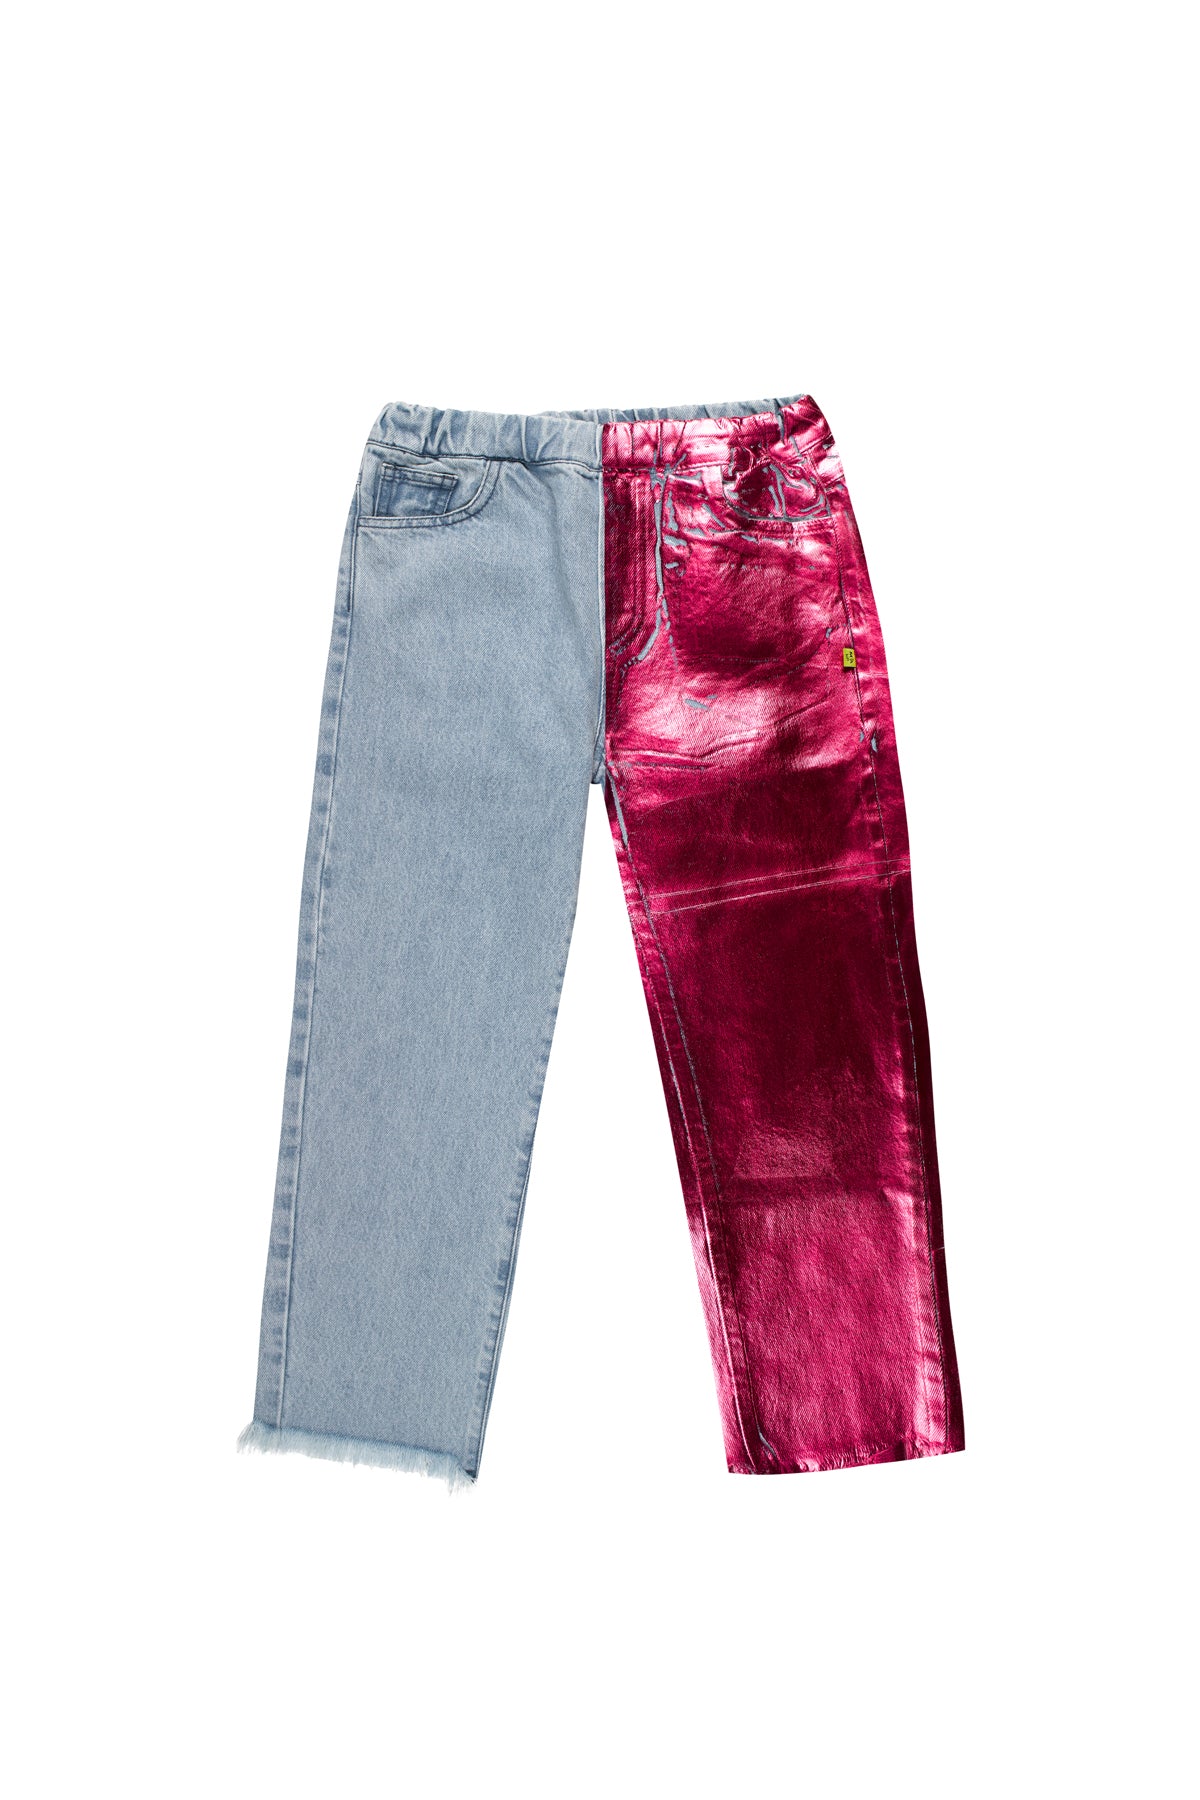 PINK FOIL BAGGY TROUSERS makids